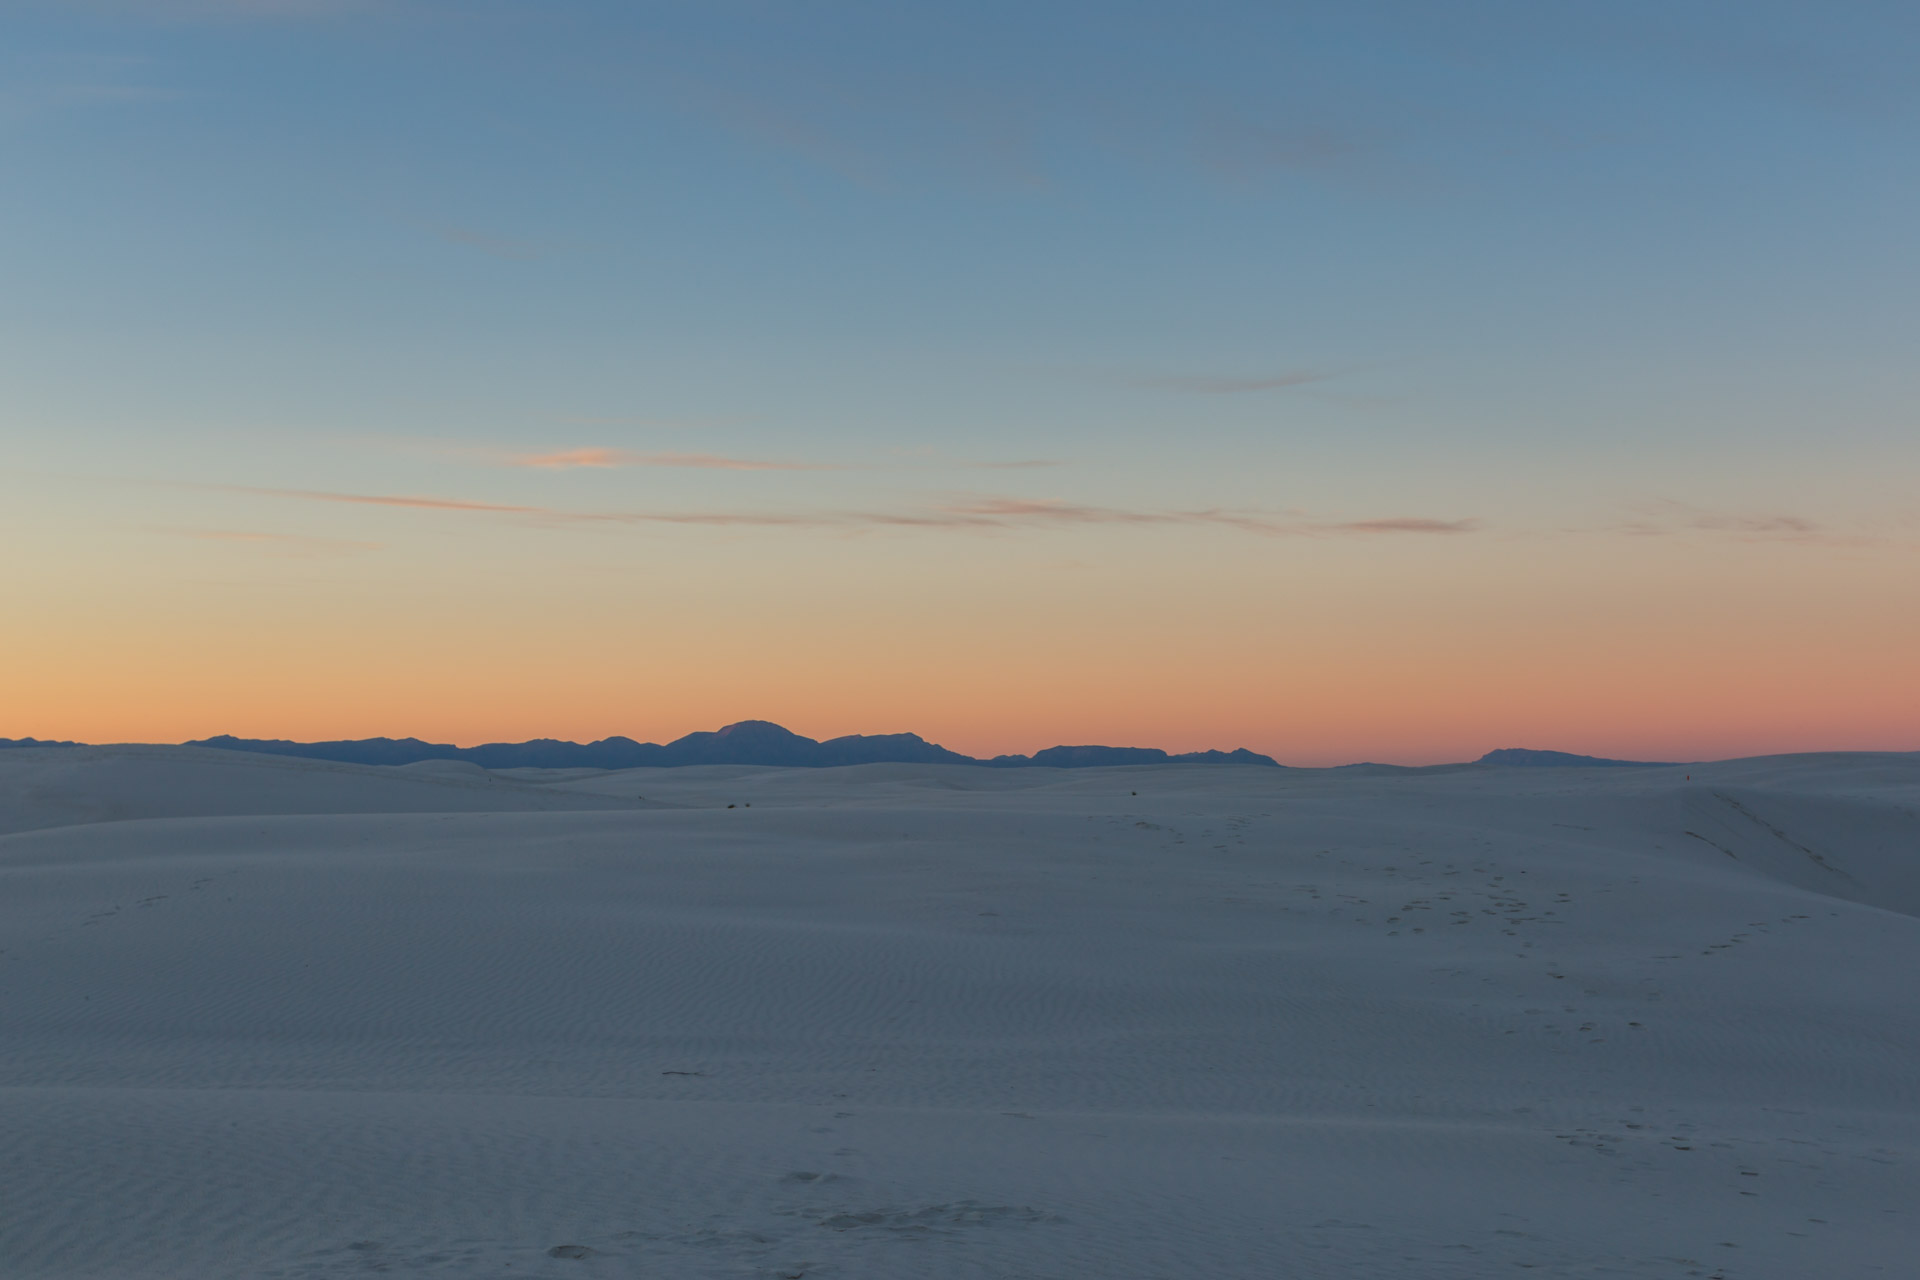 In A Sunset At White Sands (view 2)